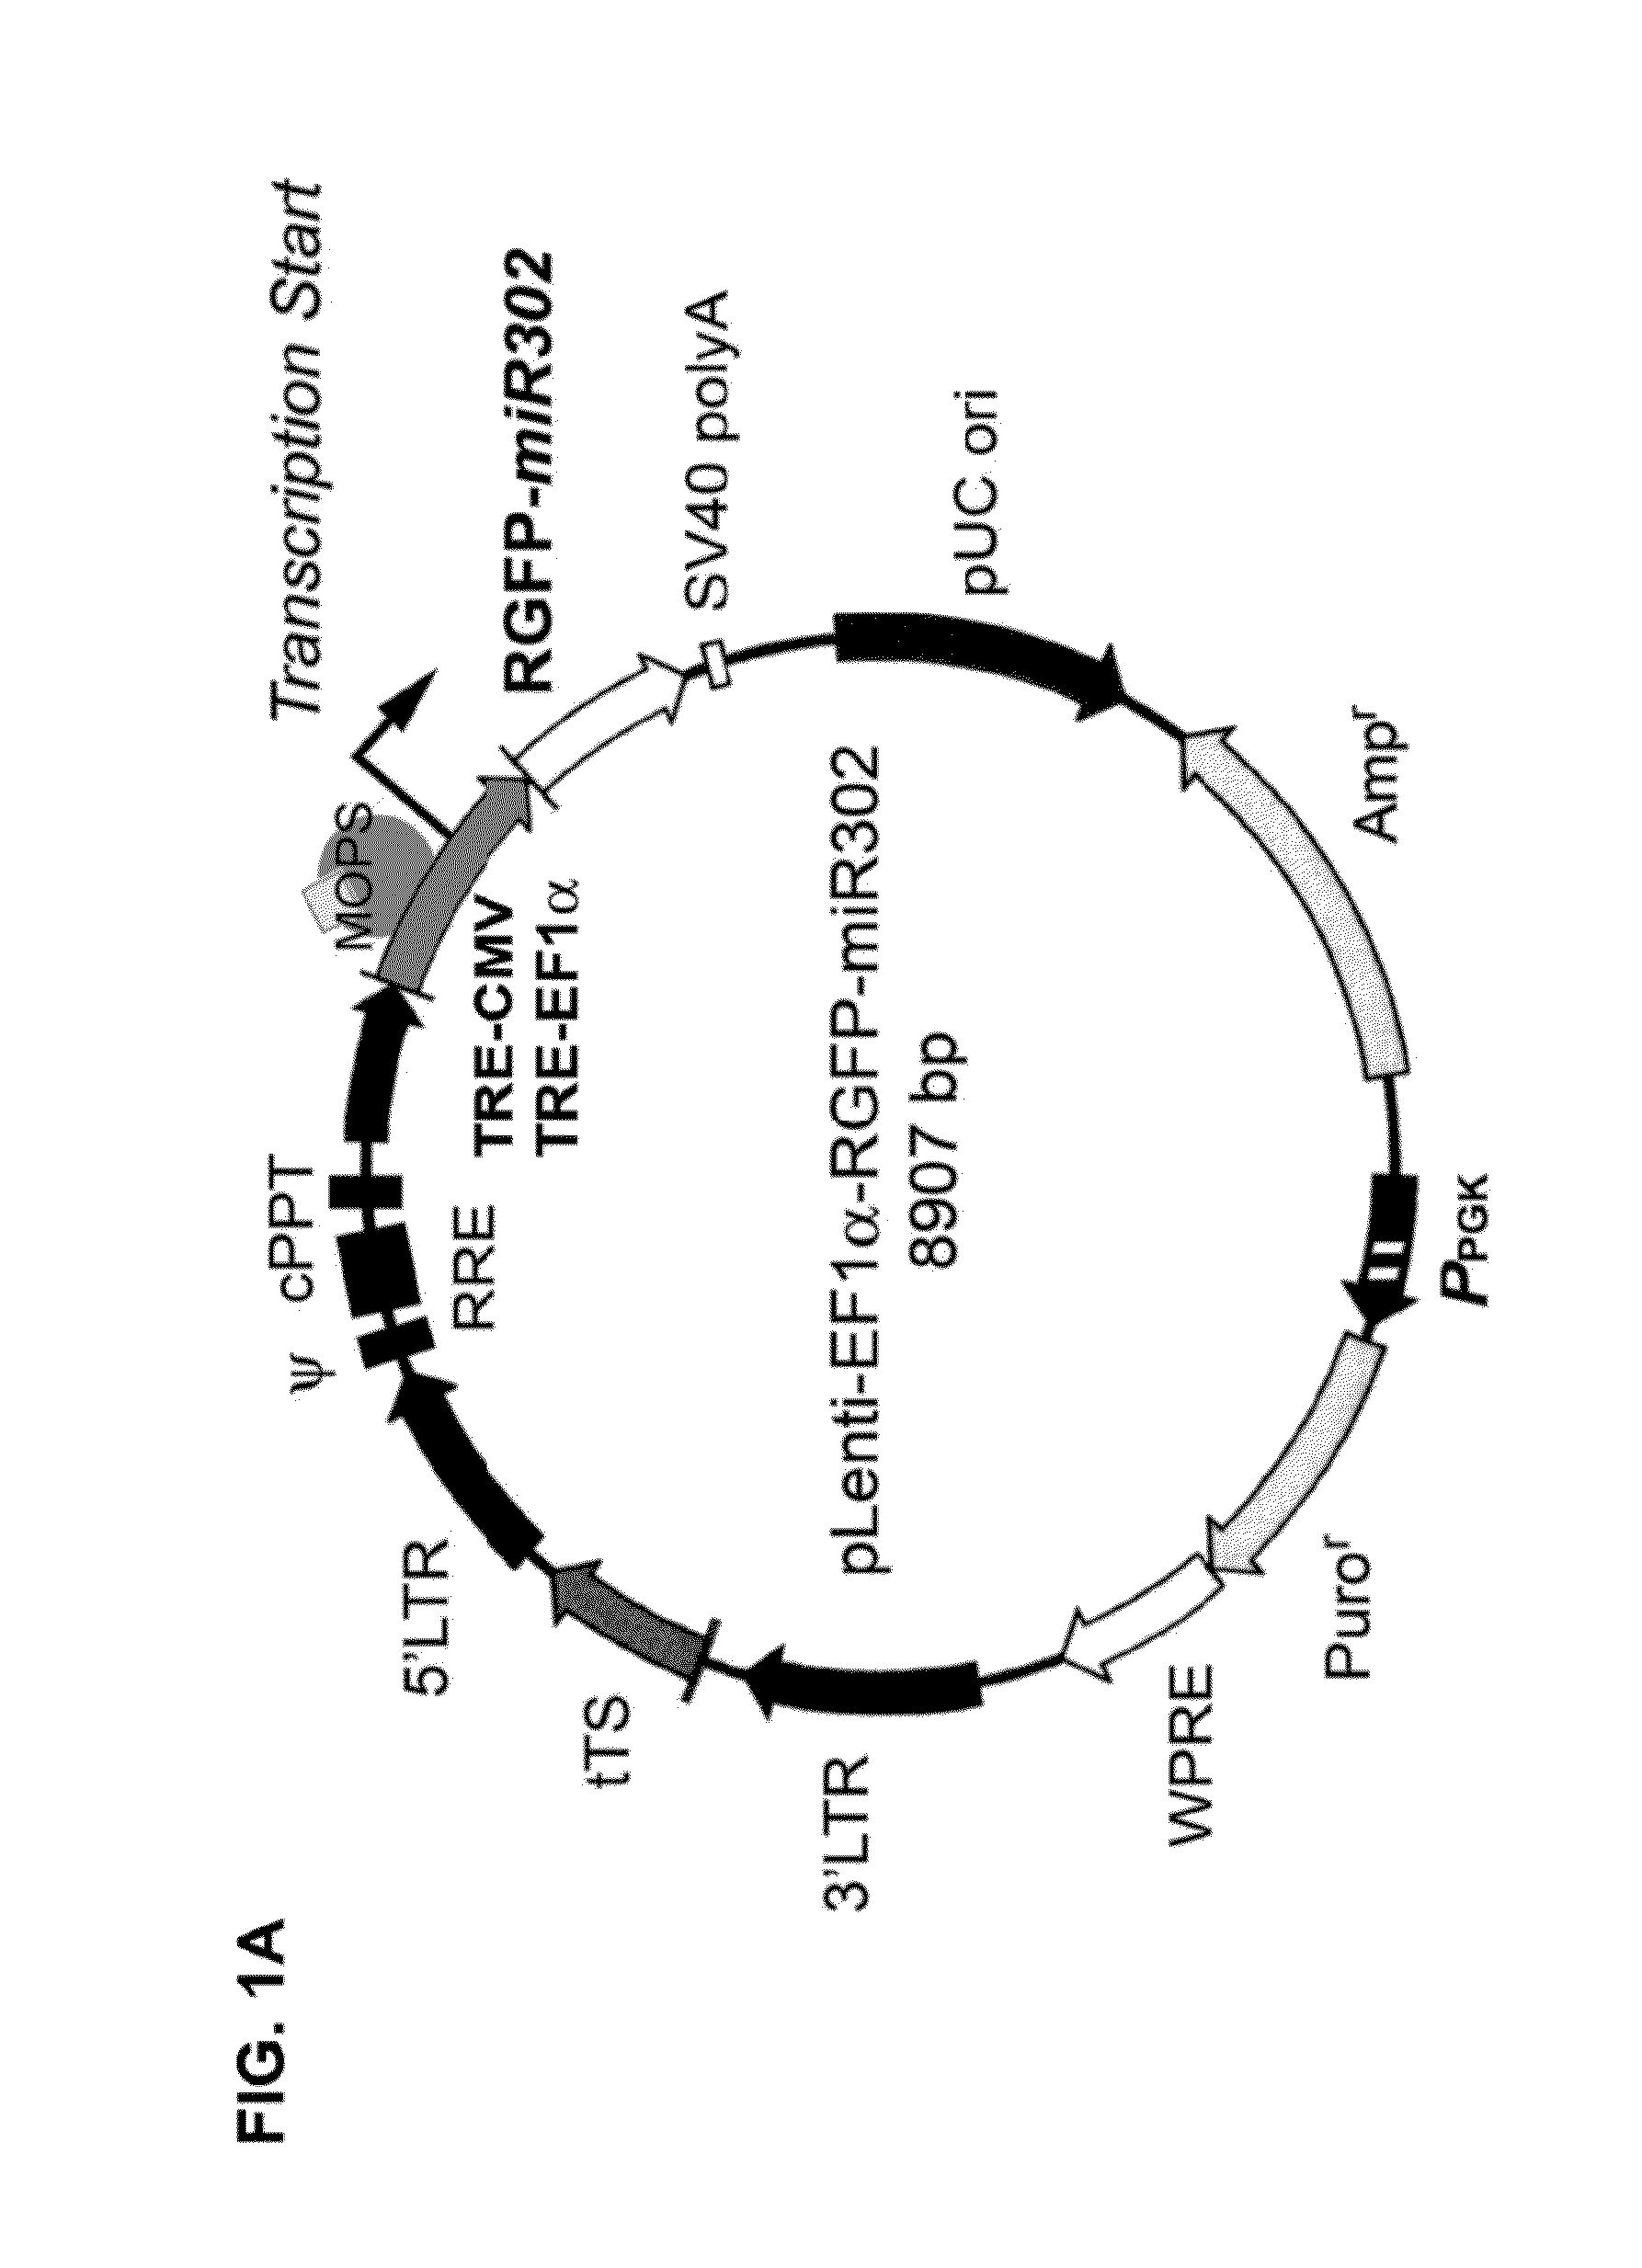 Composition for producing microrna precursors as drugs for enhancing wound healing and production method of the microrna precursors